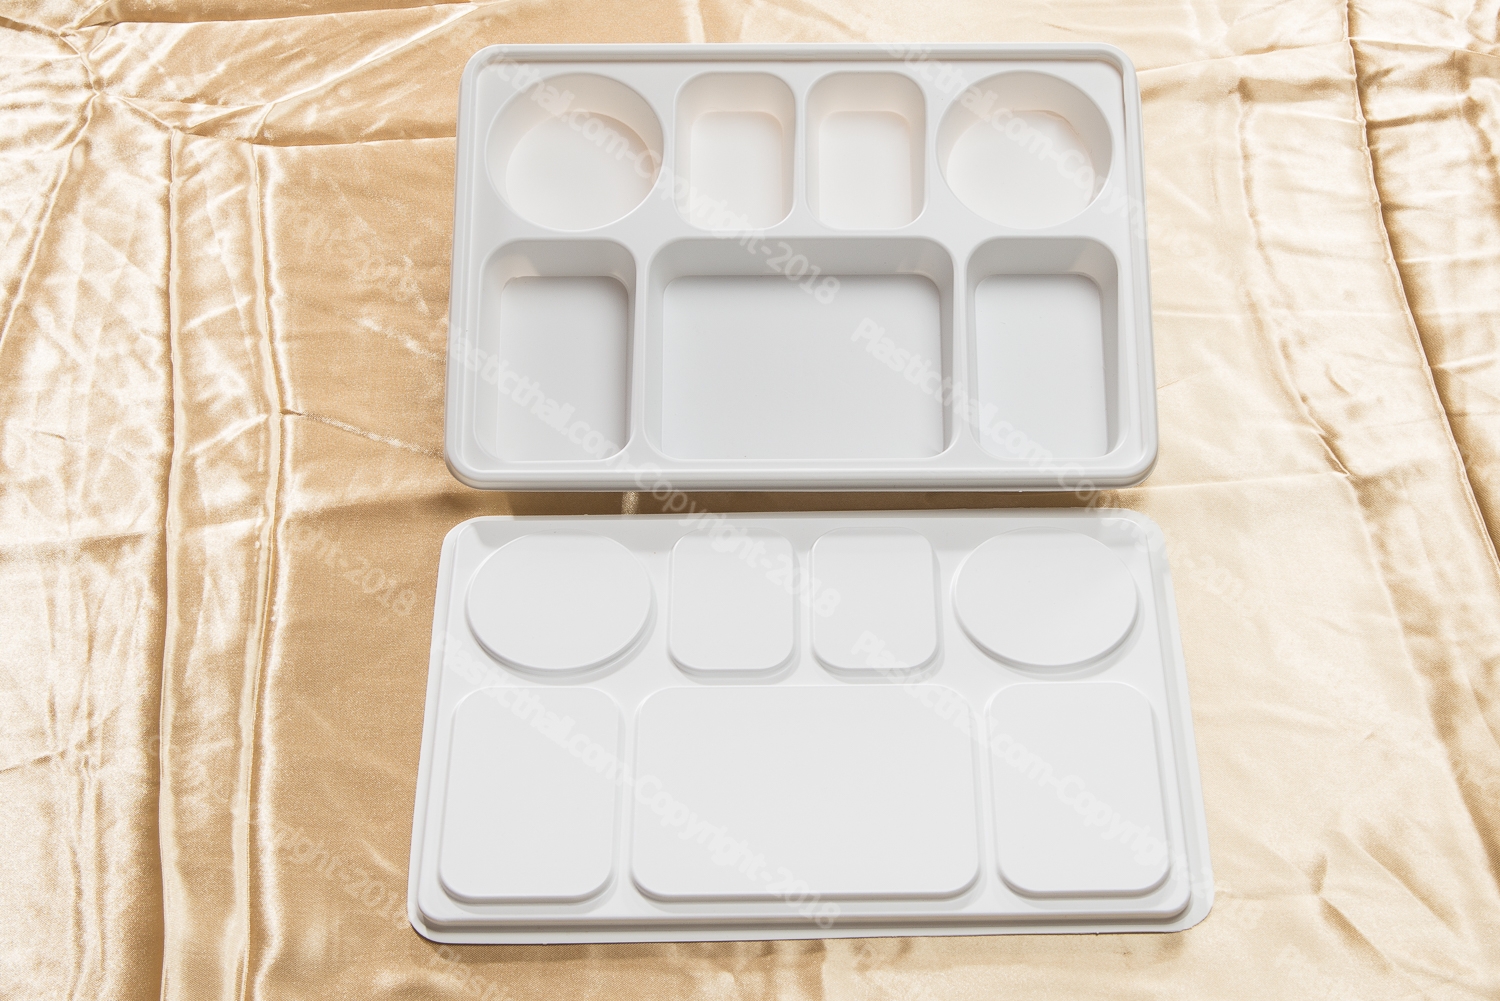 https://thalimart.com/wp-content/uploads/2018/04/7-compartment-disposable-plastic-plates-with-lid-5.jpg